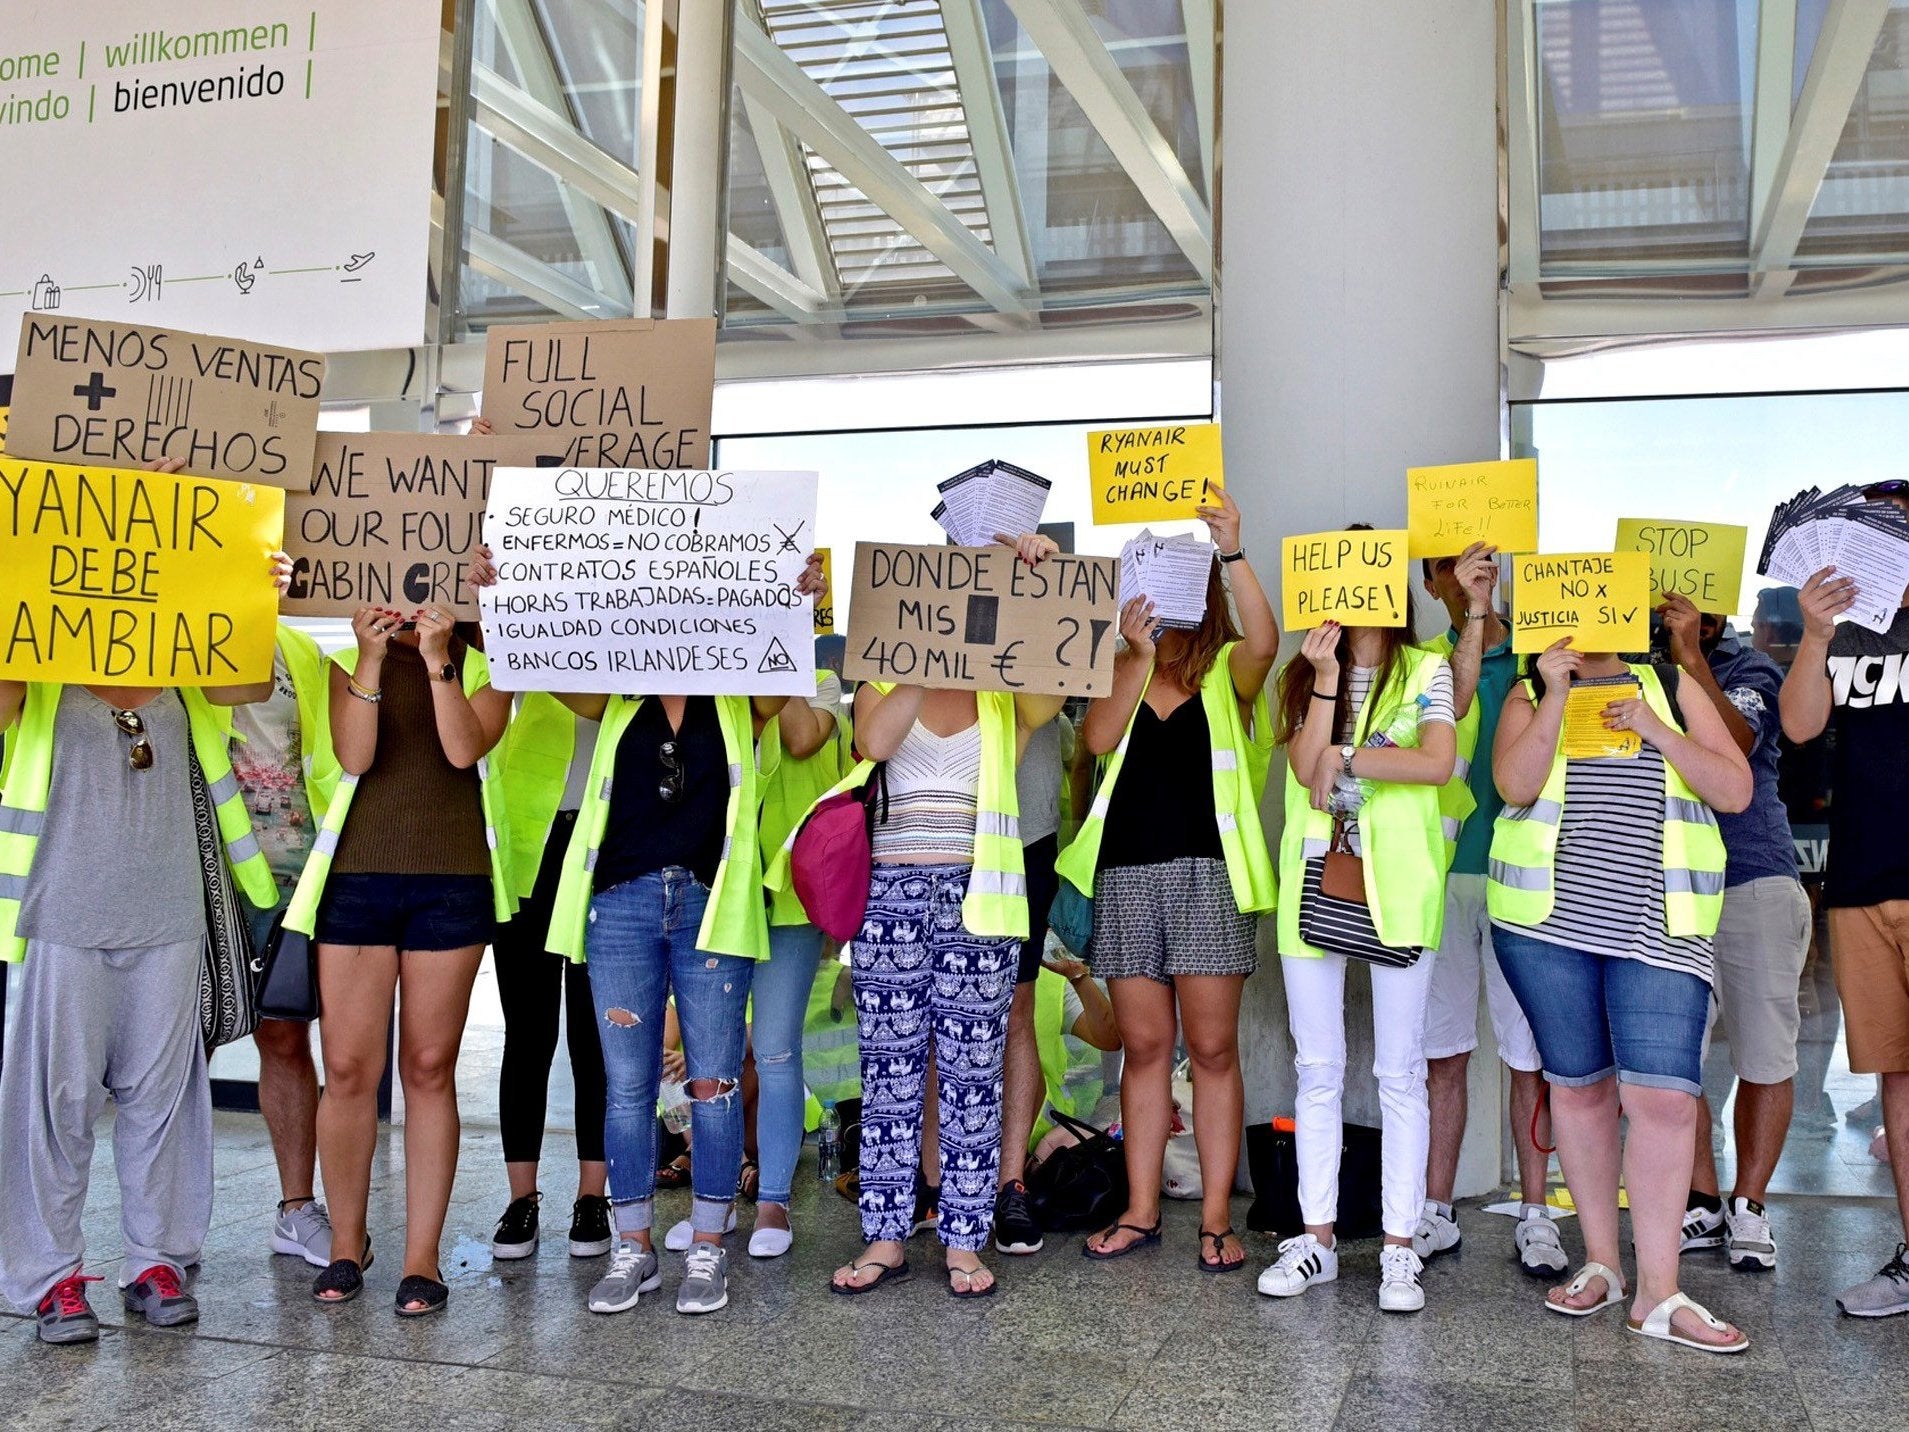 Ryanair staff demonstrate during the first day of a strike by the company's cabin crew at Palma airport in Mallorca